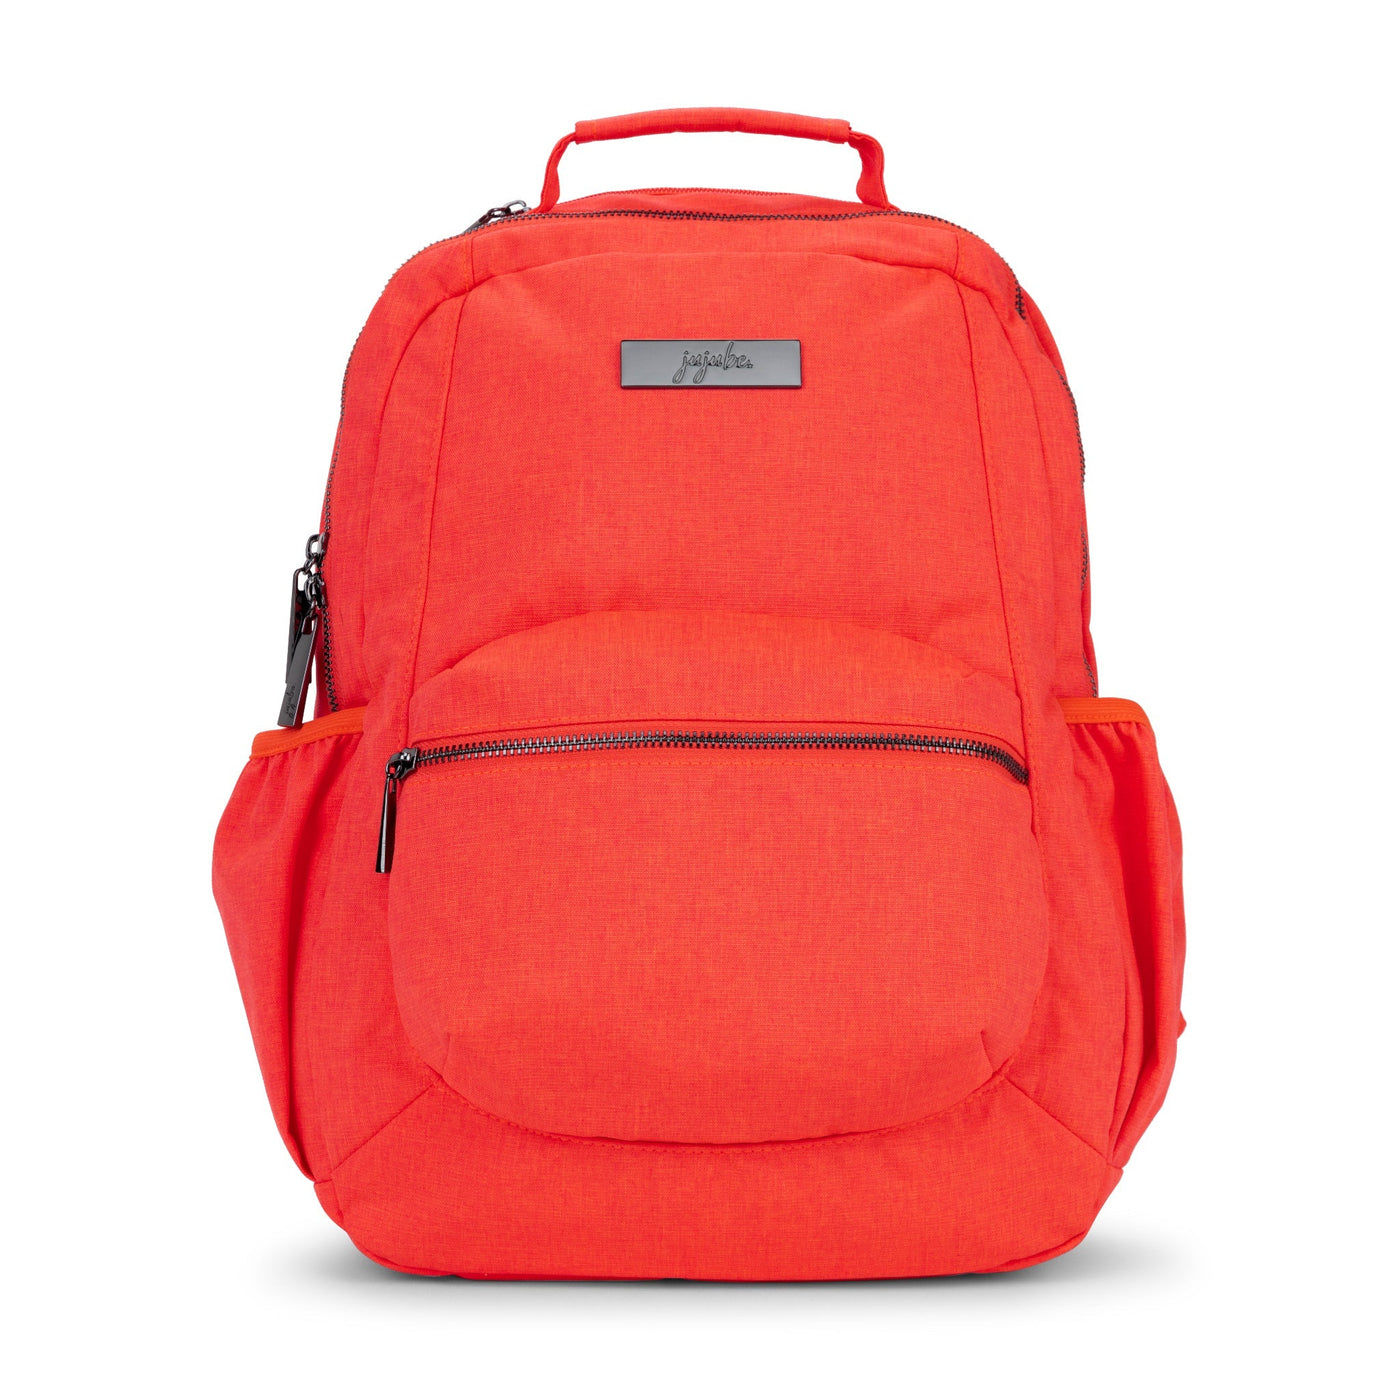 Be Packed - Neon Coral